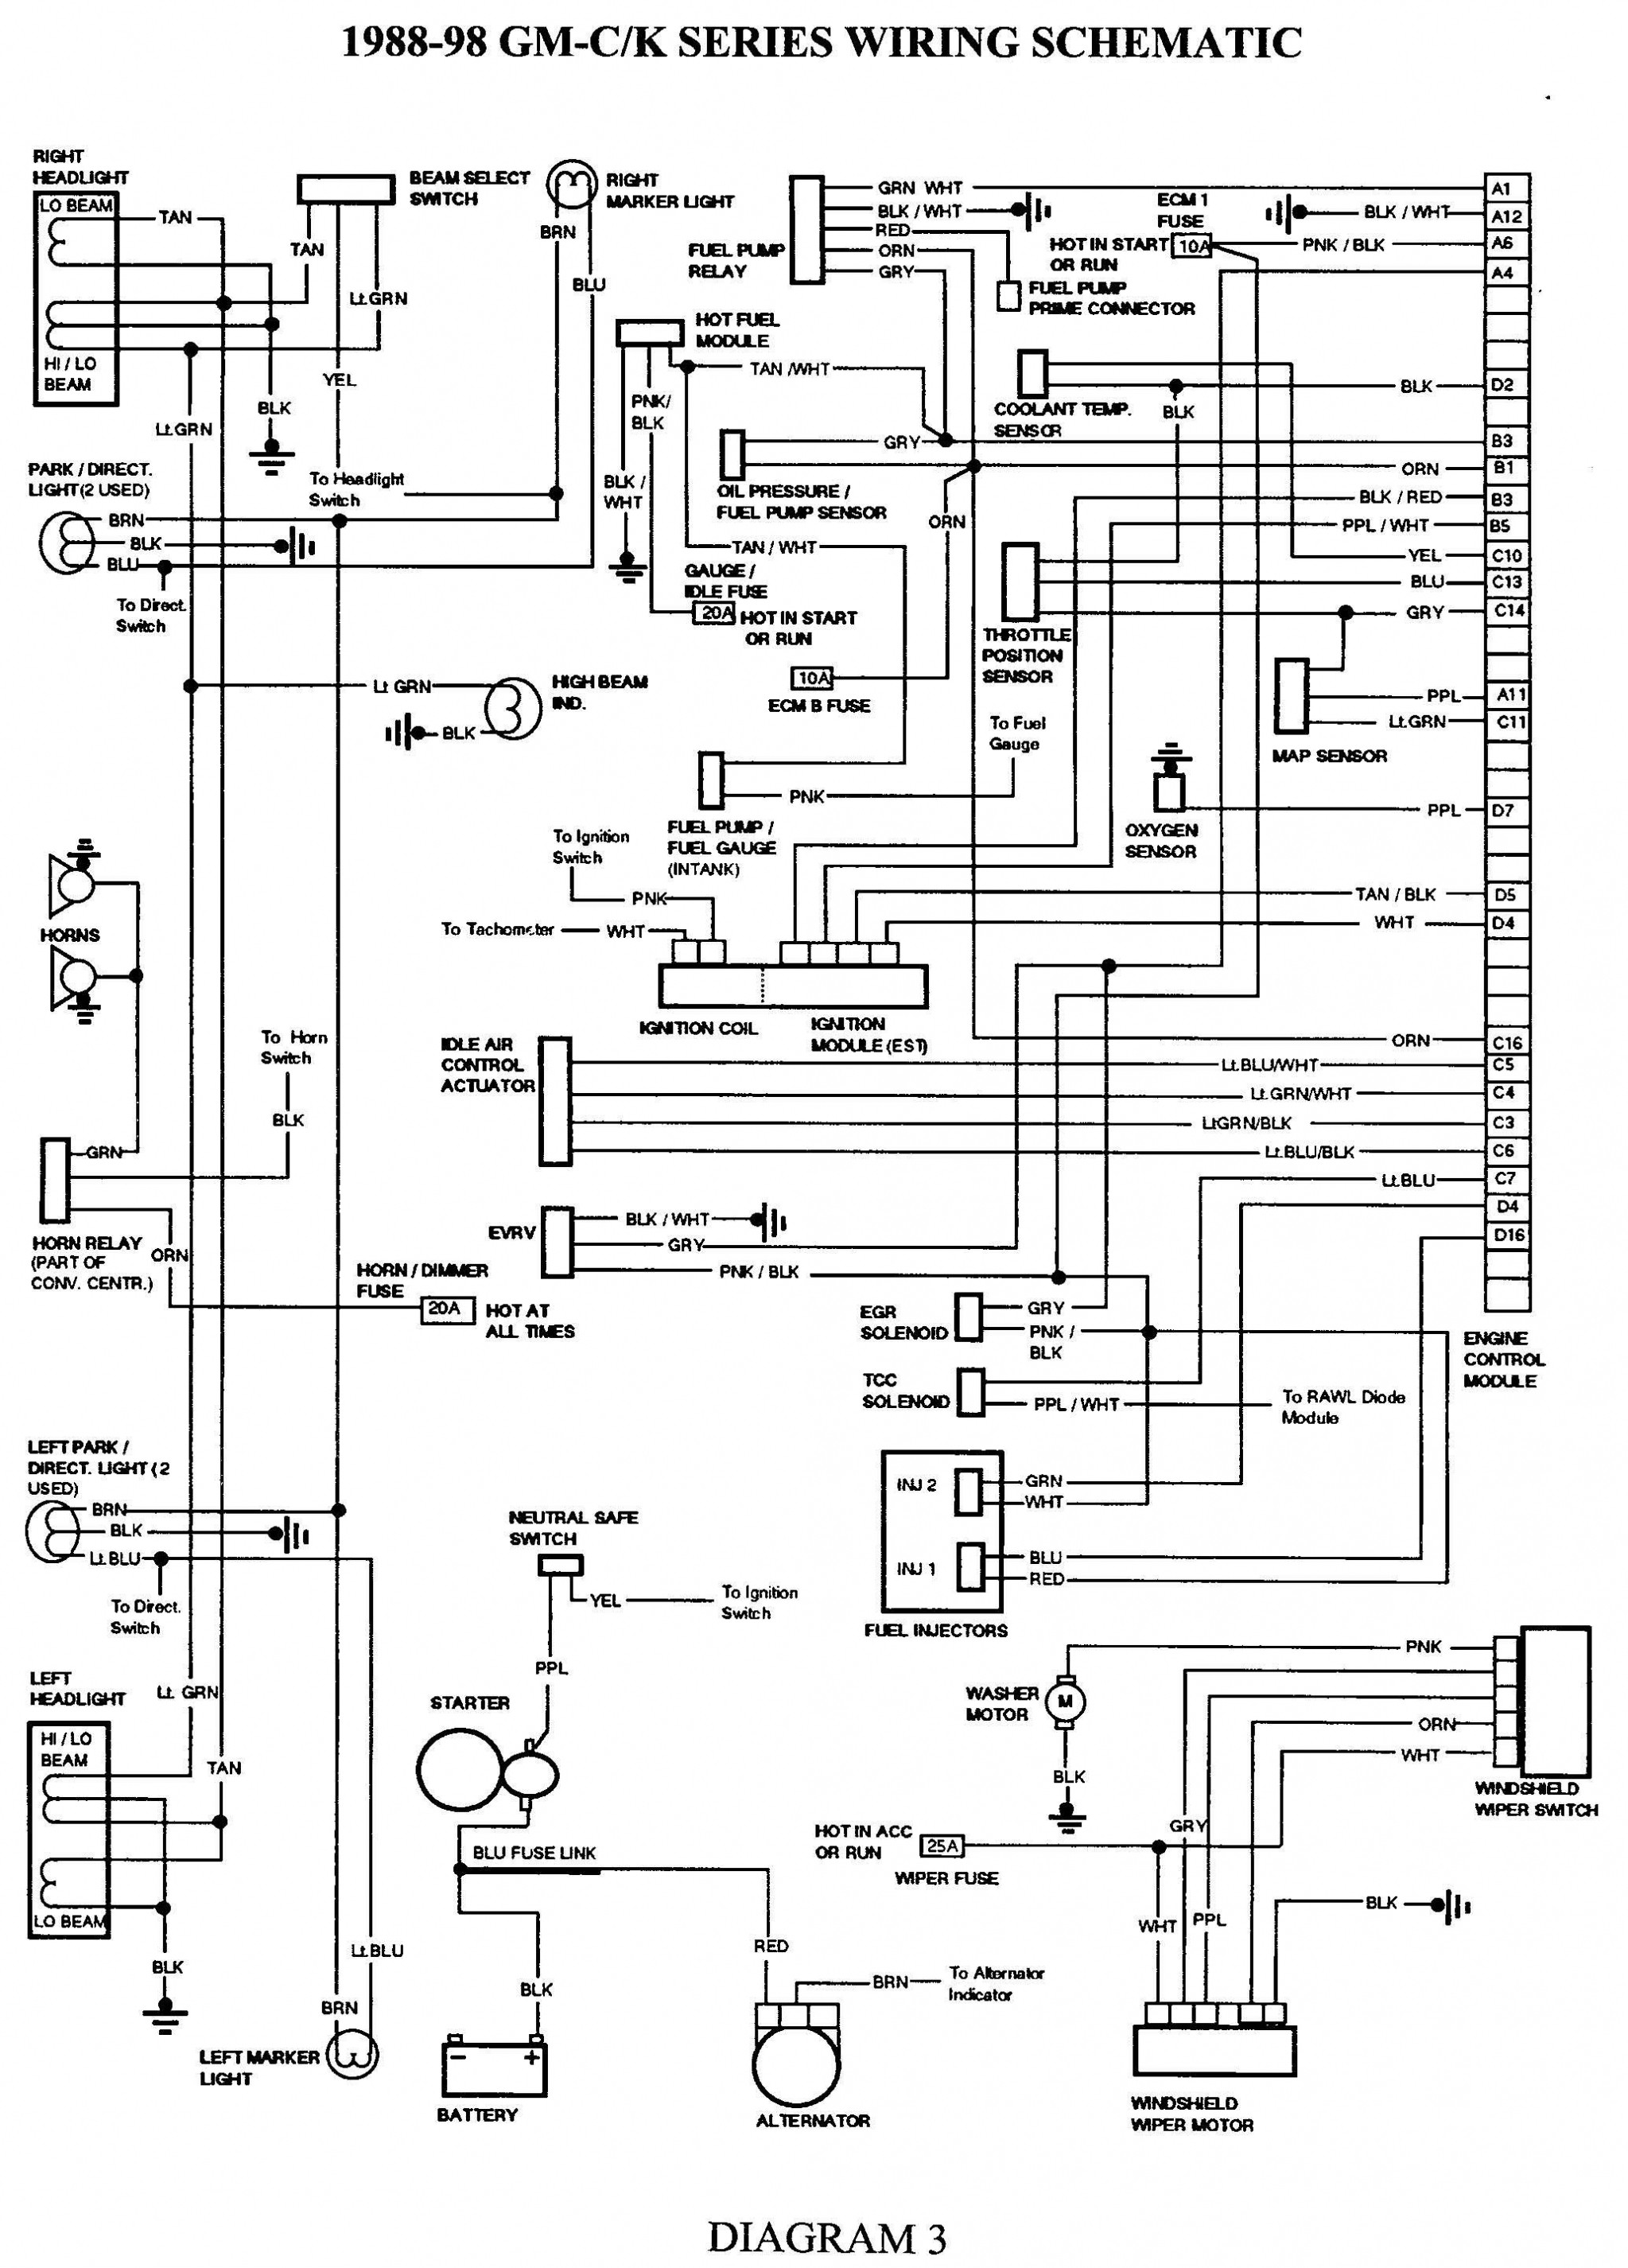 Knob And Tube Wiring Diagram – Wiring Diagram For 95 Chevy Silverado Wire Center •